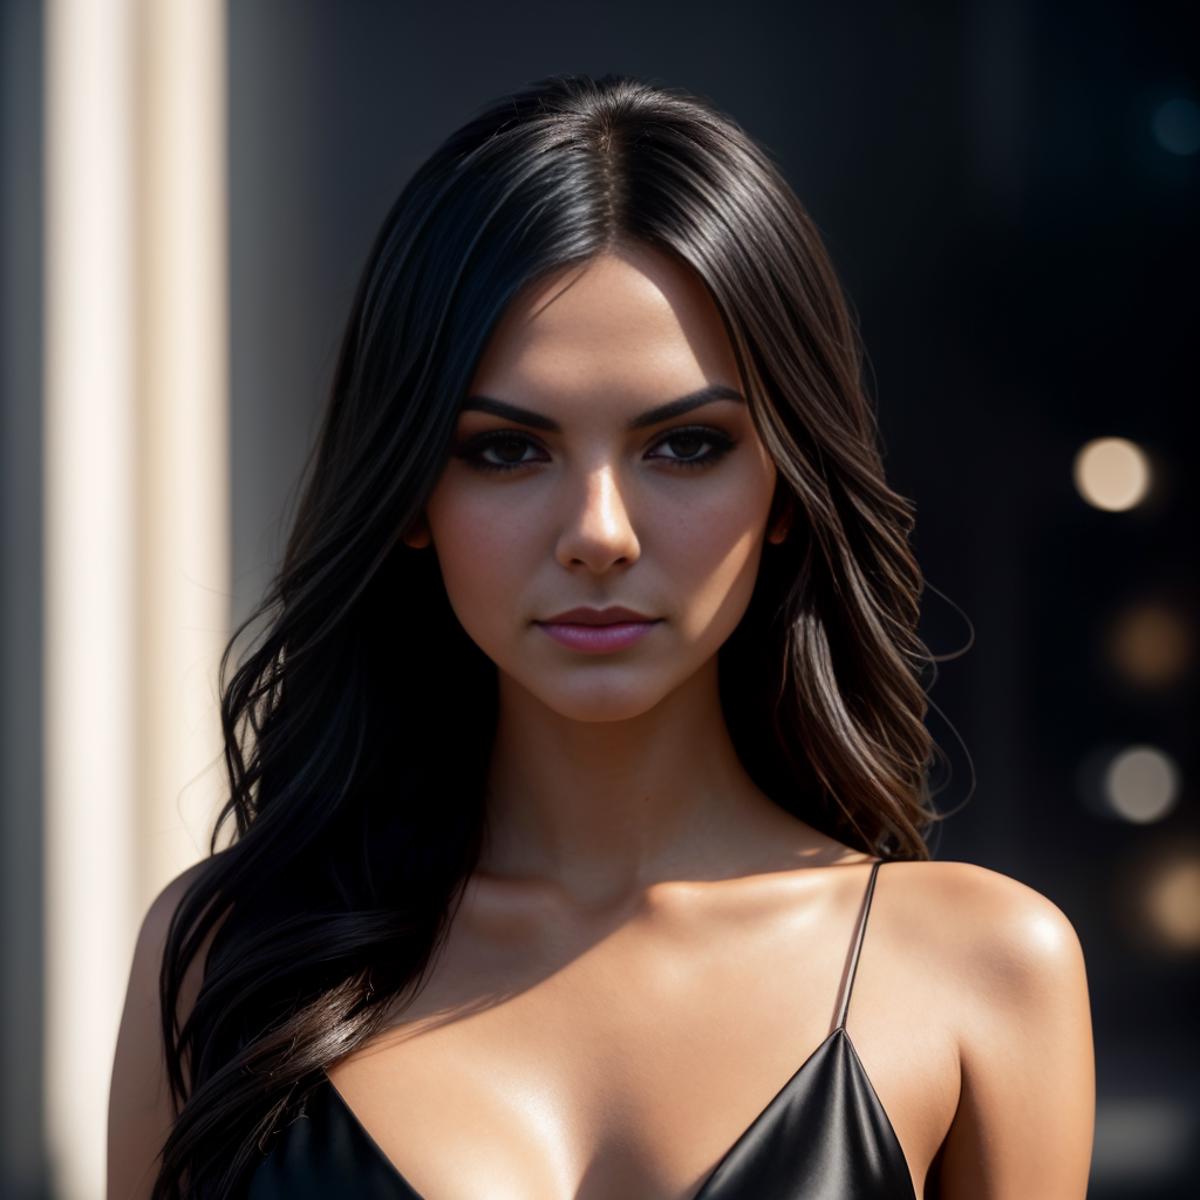 Victoria Justice image by ngsm000